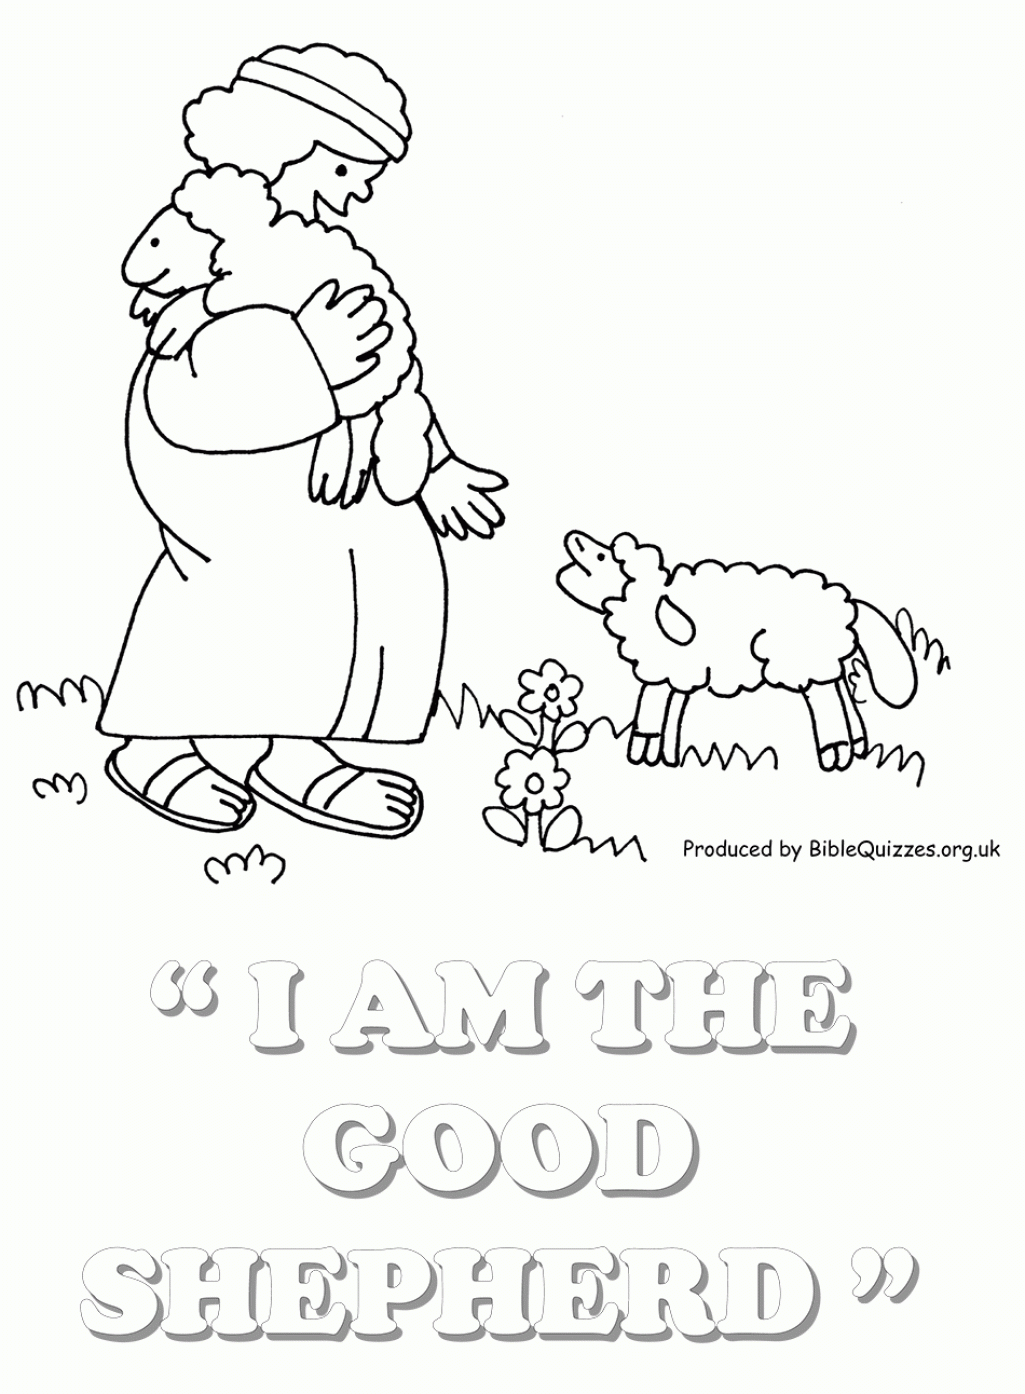 Sunday School Christmas Coloring Pages - Coloring Home